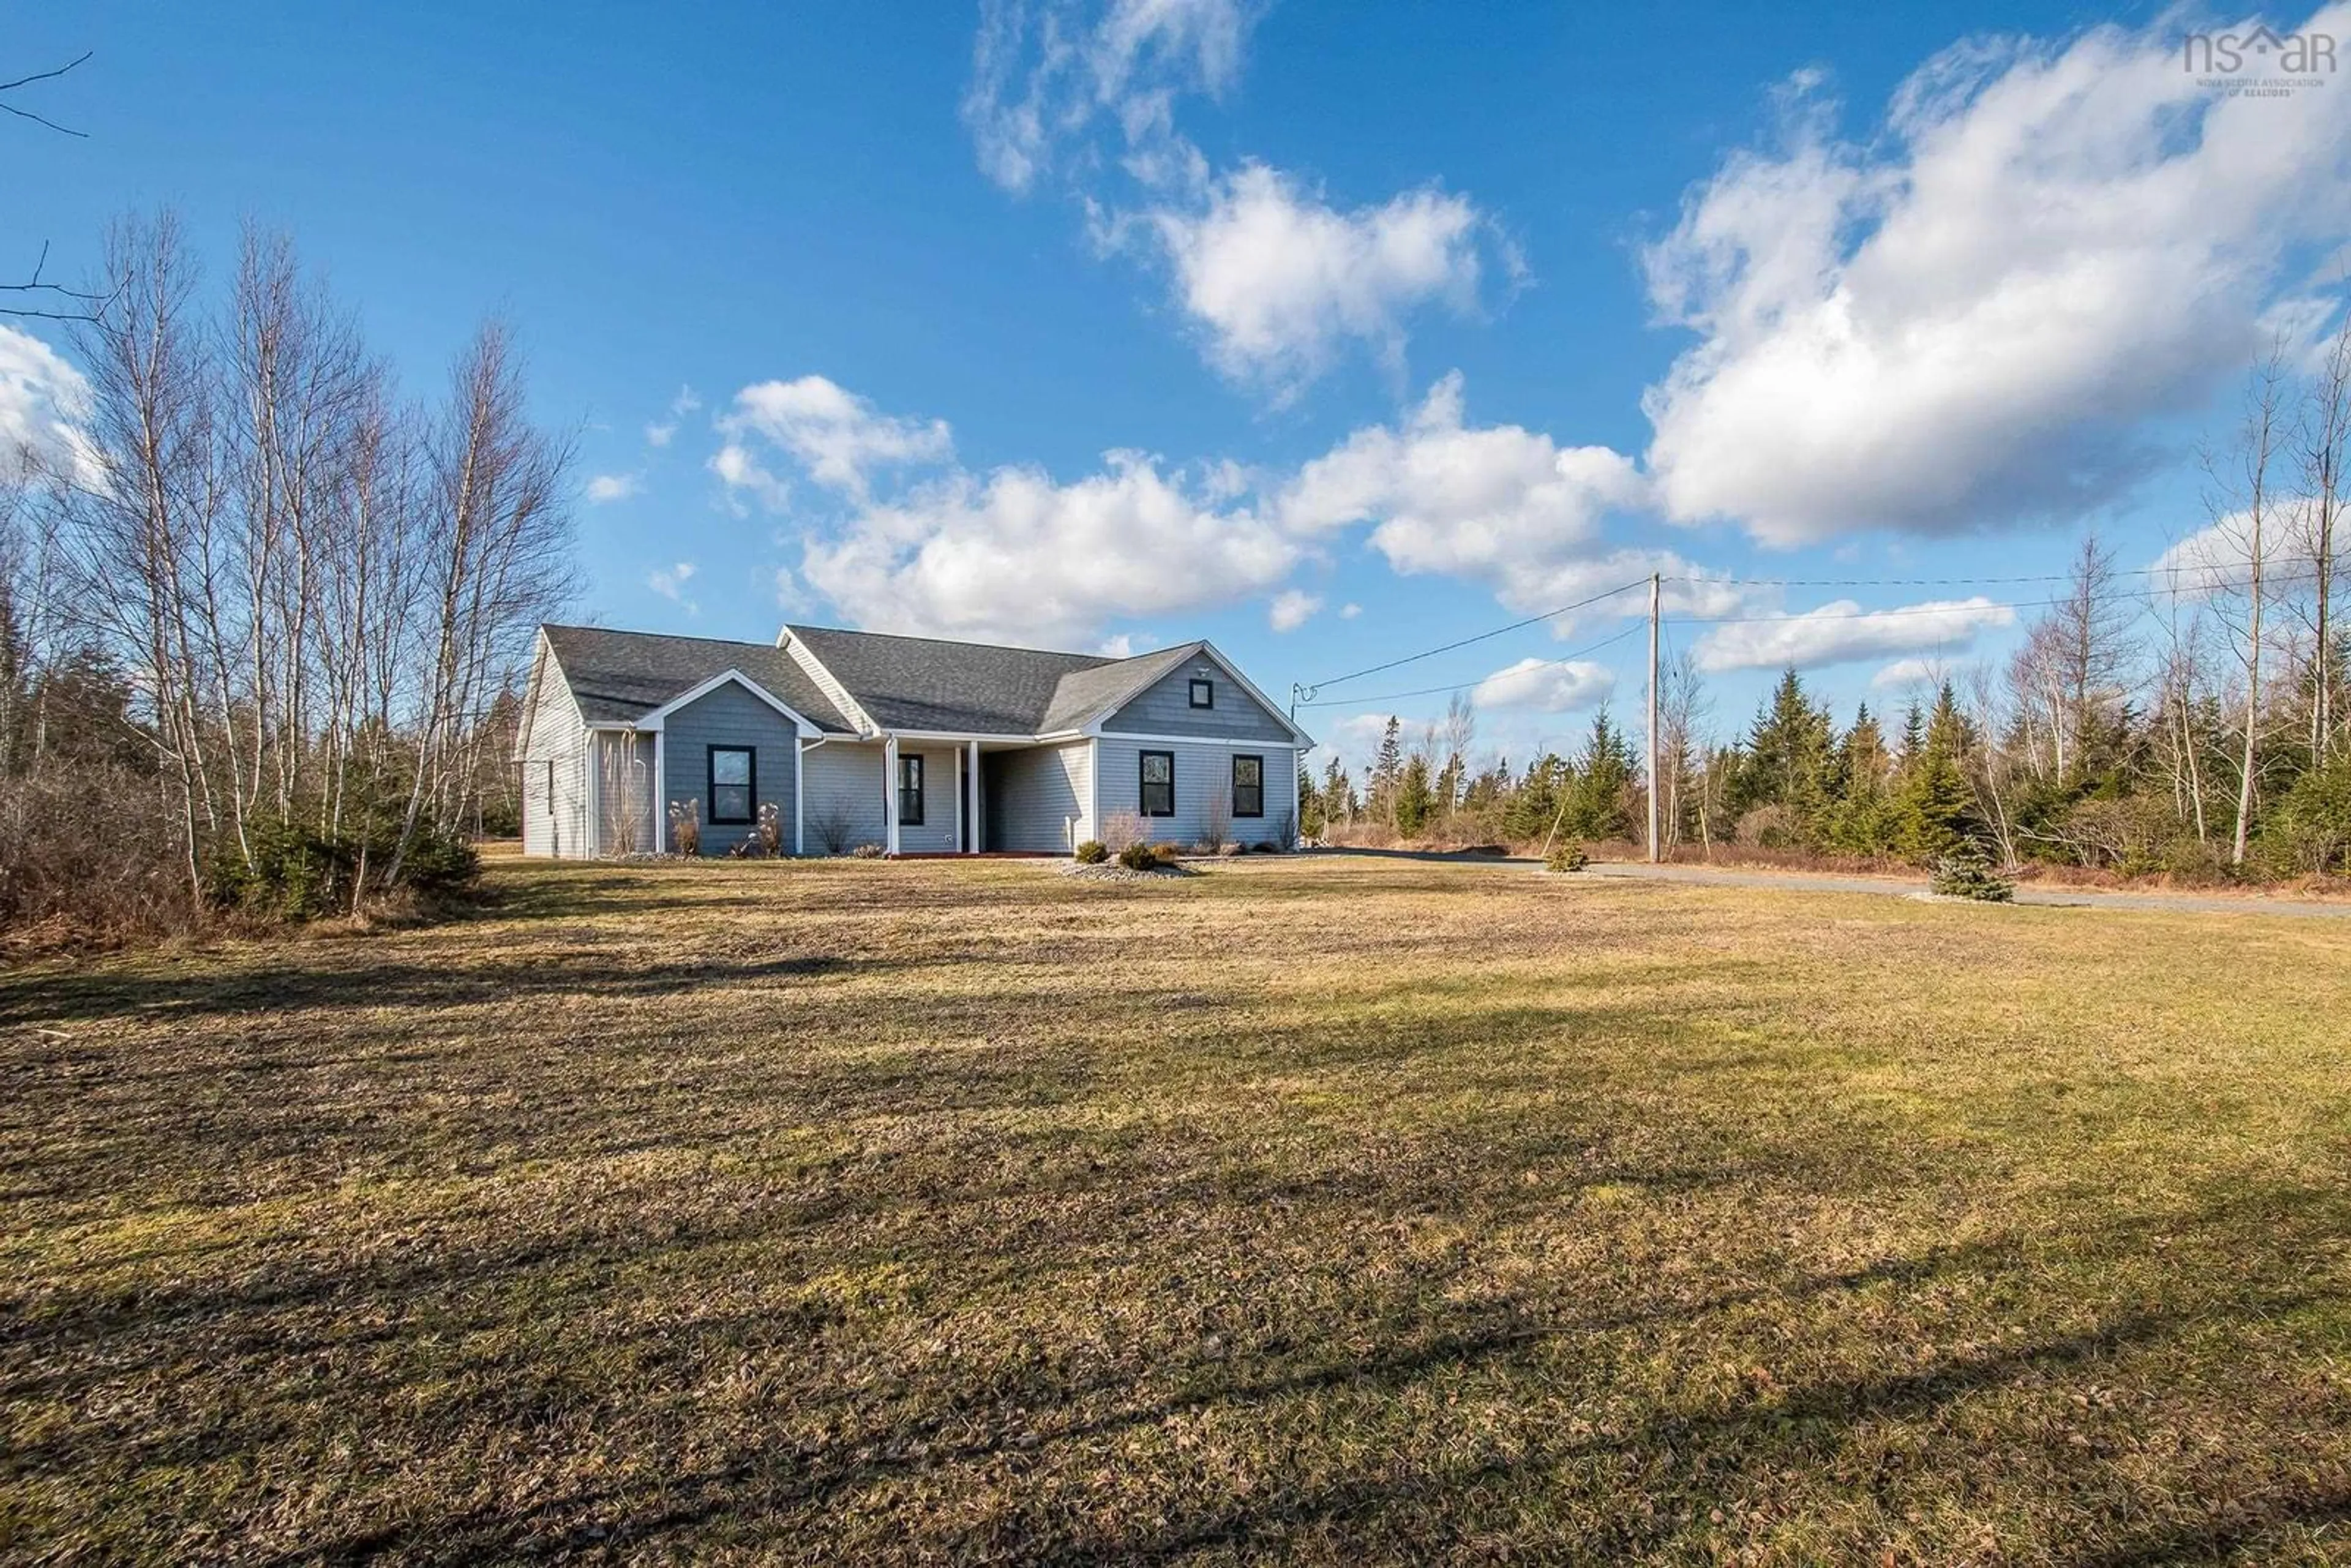 Home with unknown exterior material for 79 Moonlight Crt, Crowes Mills Nova Scotia B6L 5J3